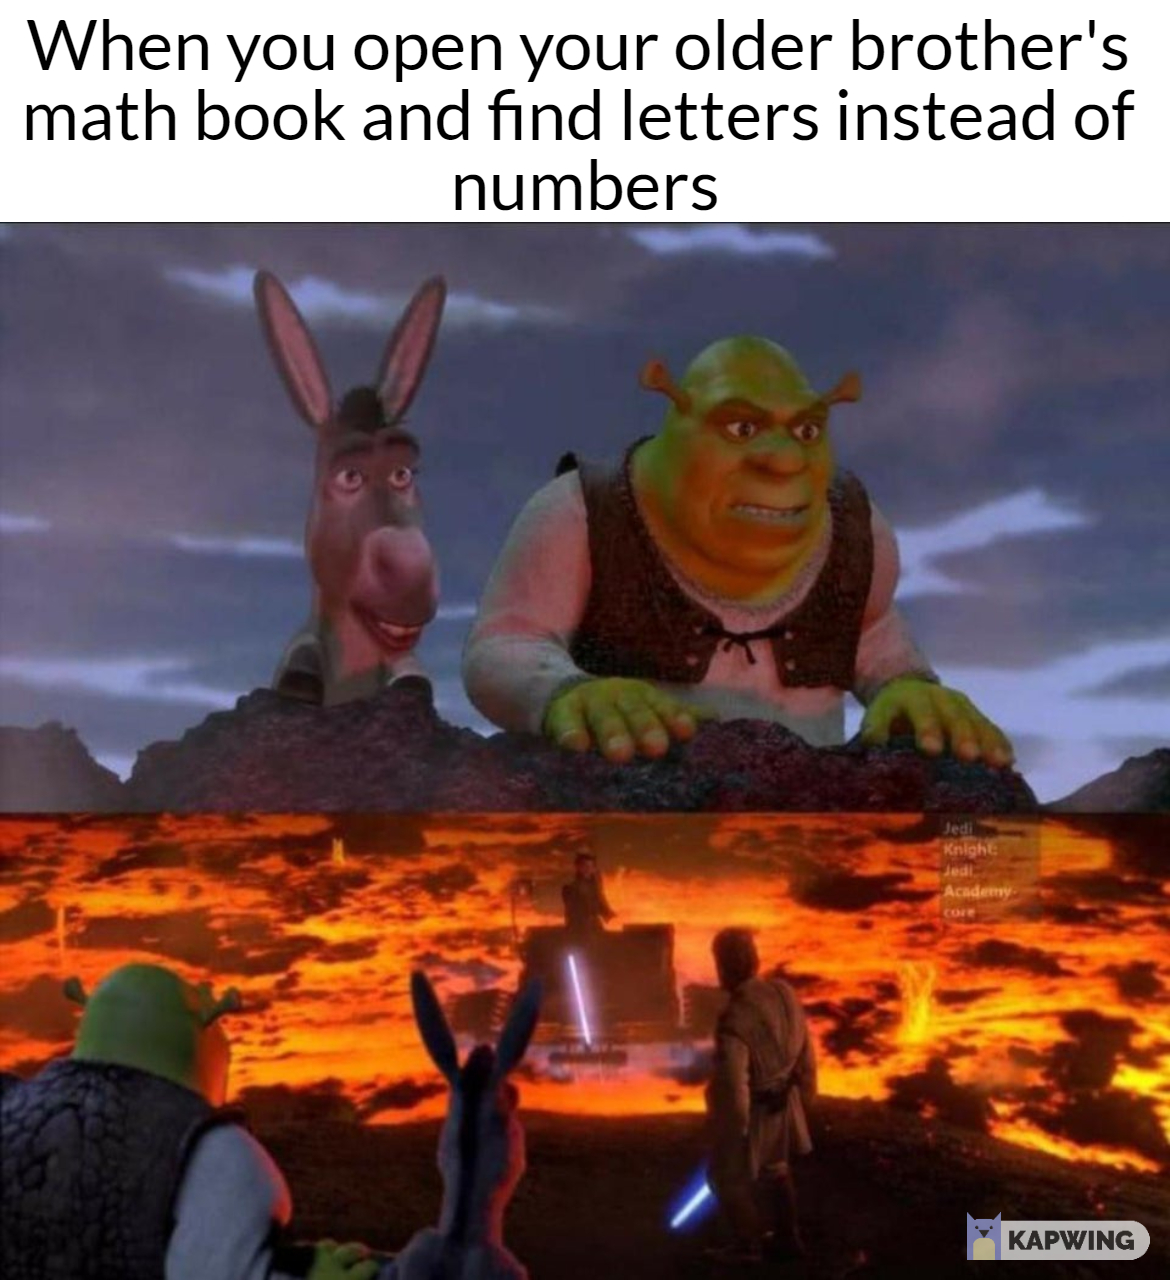 shrek star wars meme - When you open your older brother's math book and find letters instead of numbers Kapwing